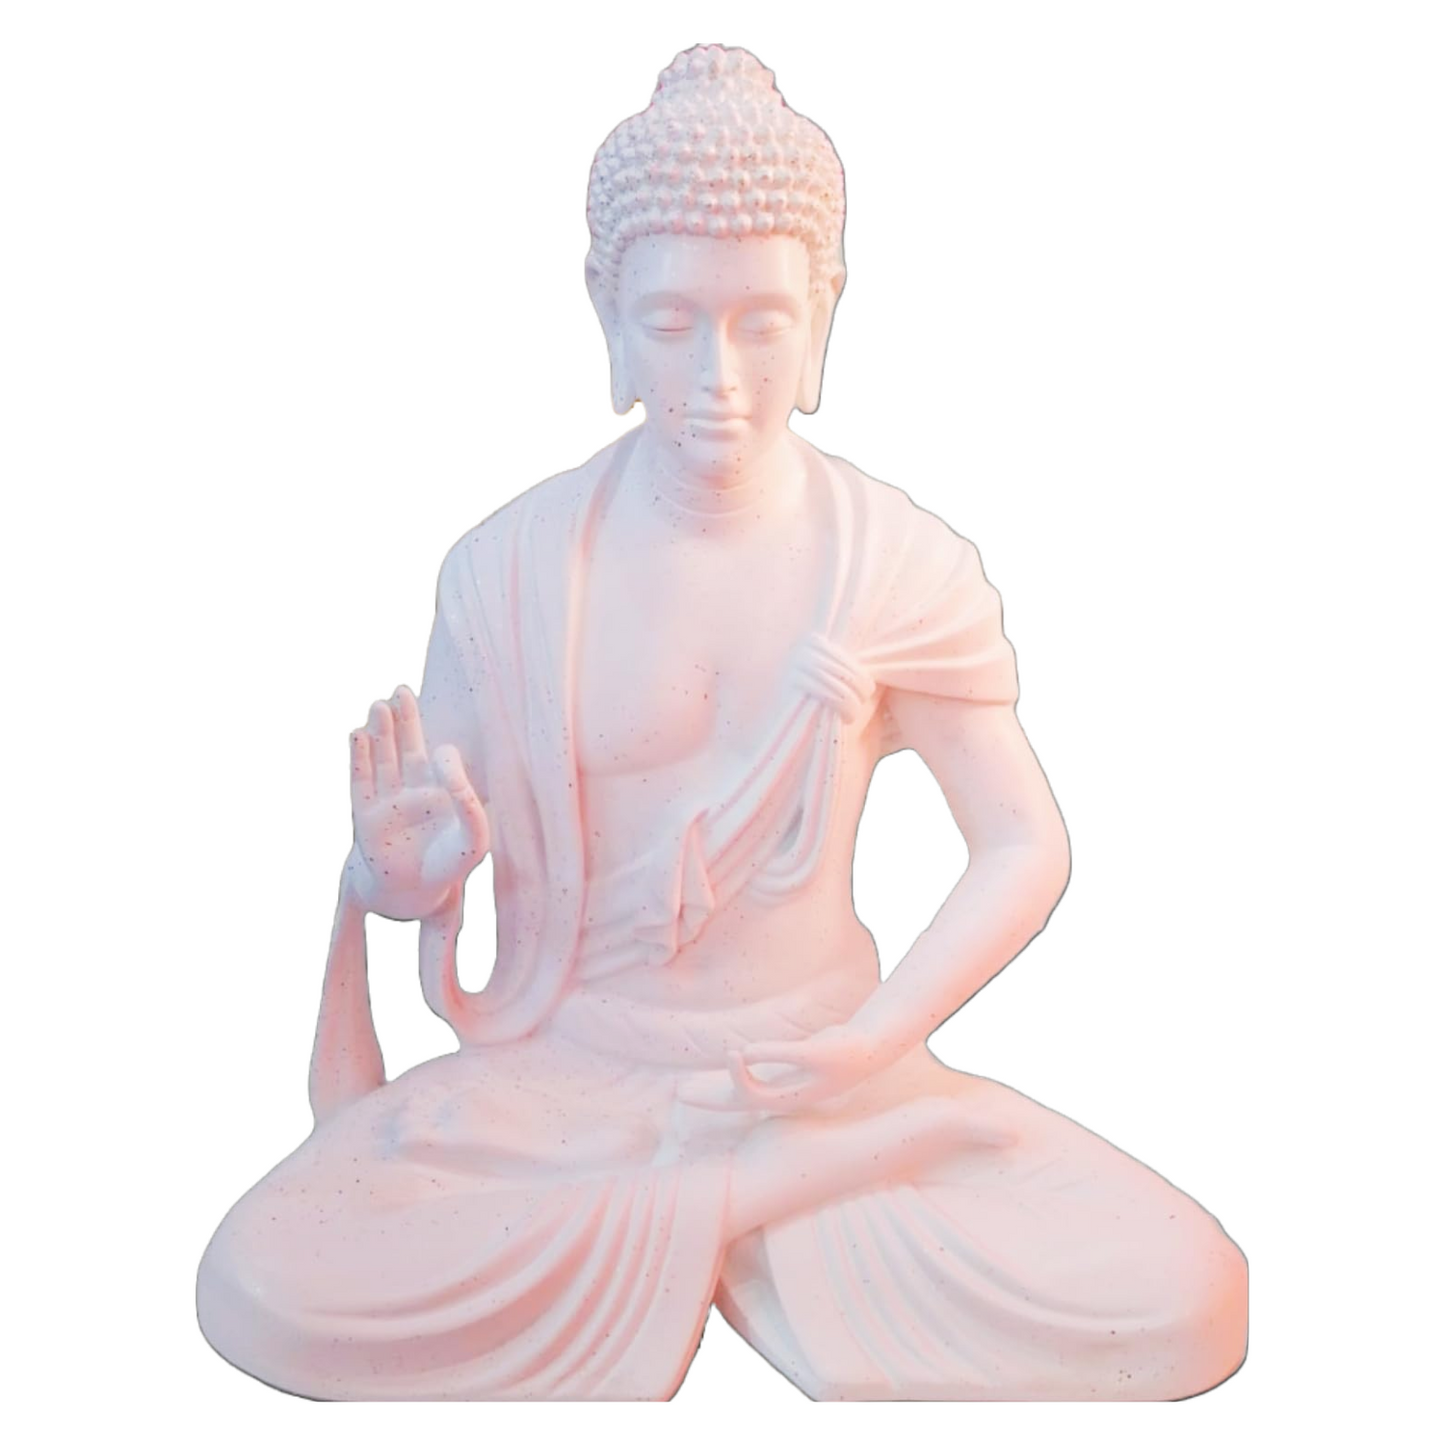 Statue ALiLA Big Size Meditating White Buddha Idol Statue Showpiece for Home Garden Living Room Decor Decoration Gift Gifting Items, 24 Inches Height Statue